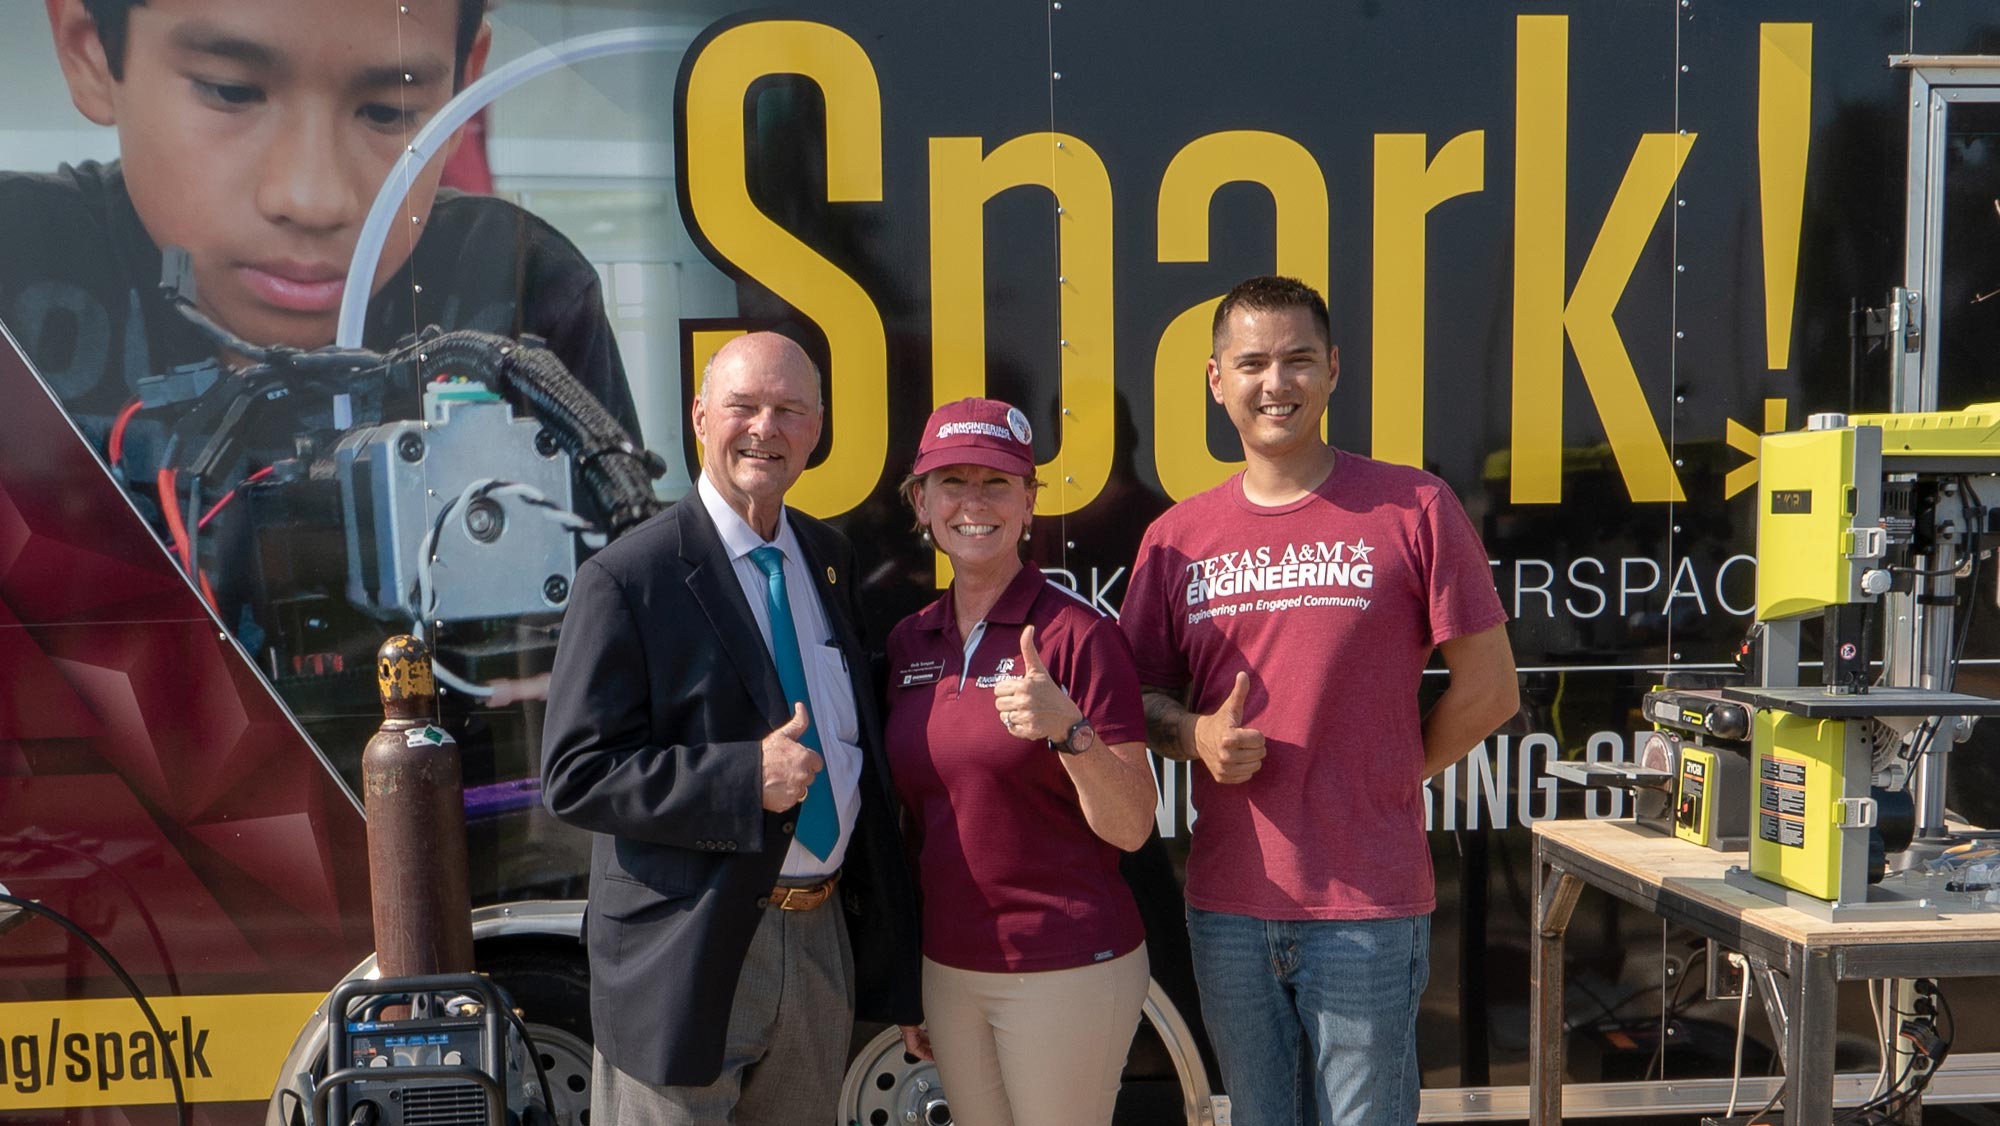 Two adult males and an adult female smile at the camera and give the "gig 'em" thumbs up symbol in front of the Spark trailer.